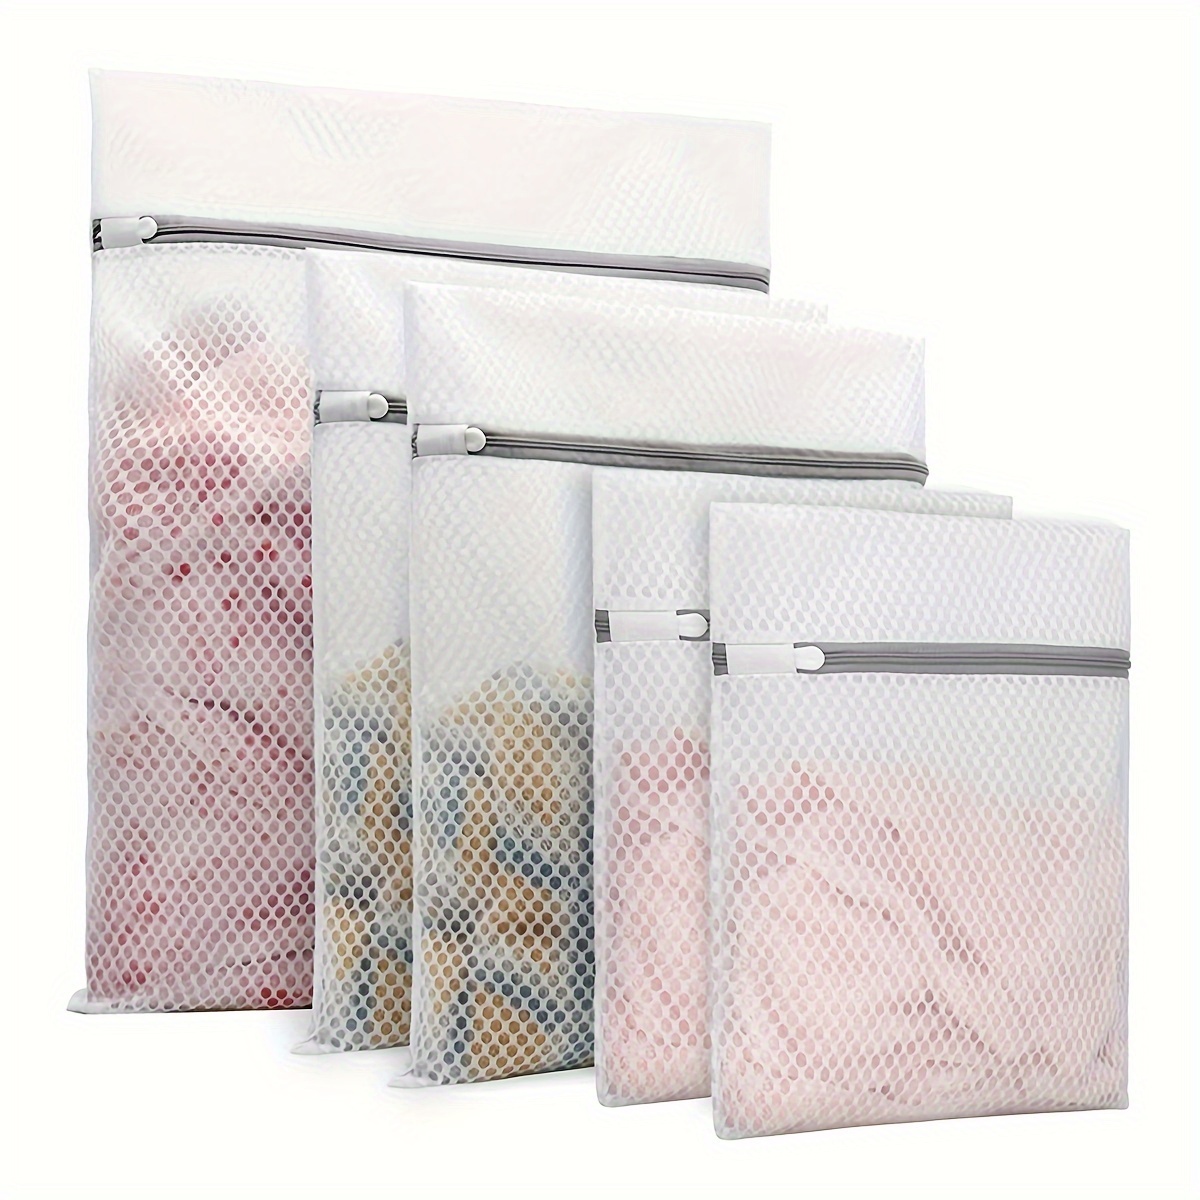 Reusable Laundry Mesh Clothes Washing Bags Underware Washing Bags